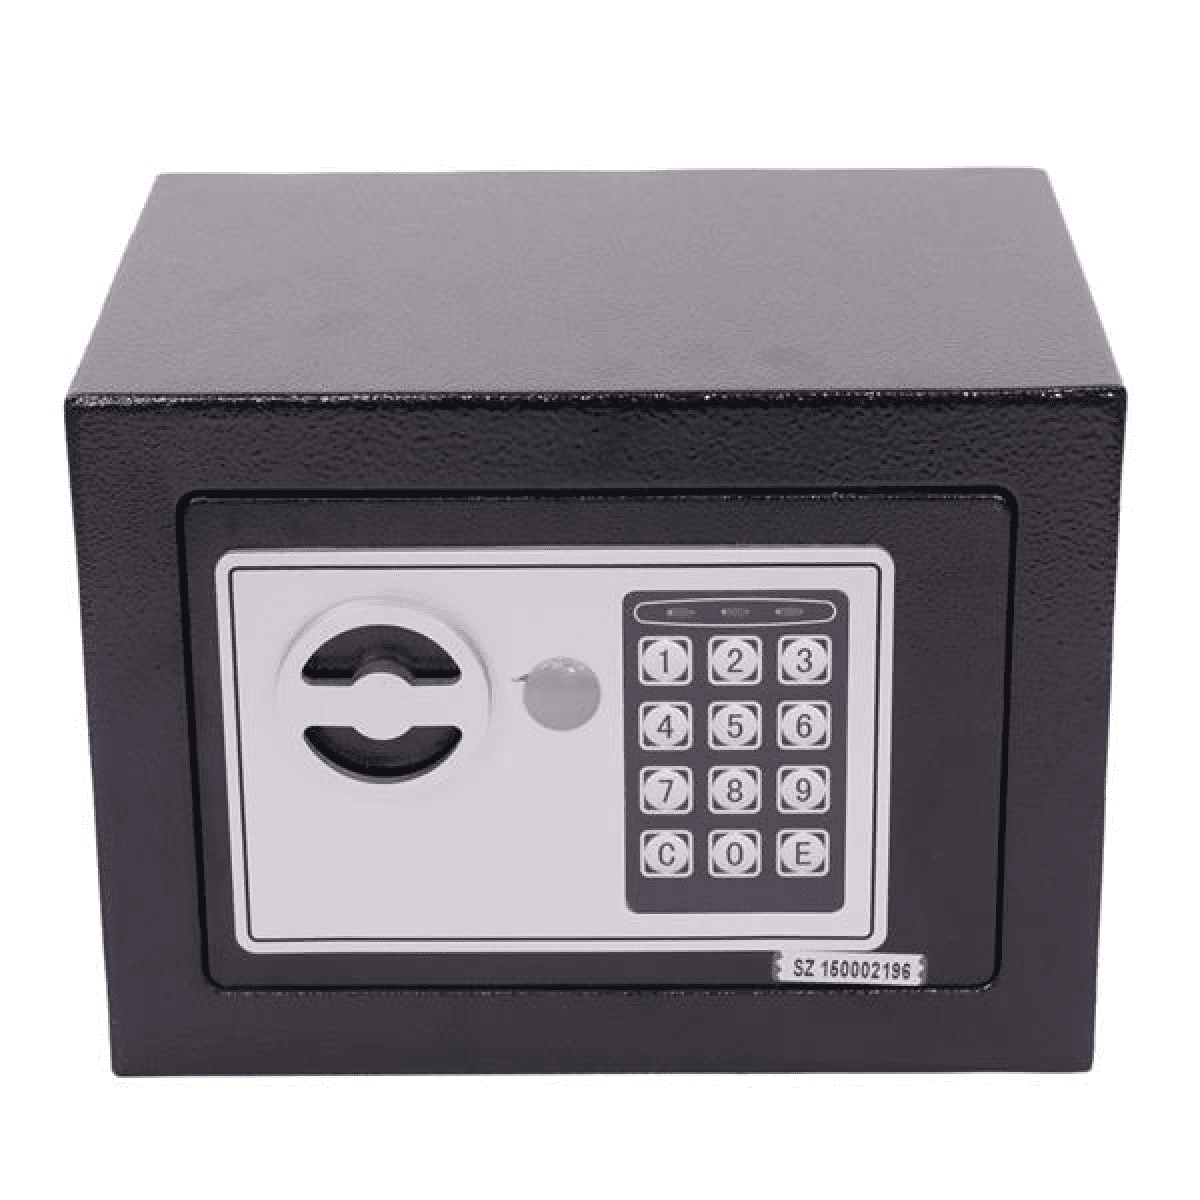 Safe Box Electronic with Hook Digital and Security with Keypad Lock for Home Office Hotel Jewelry Cash 